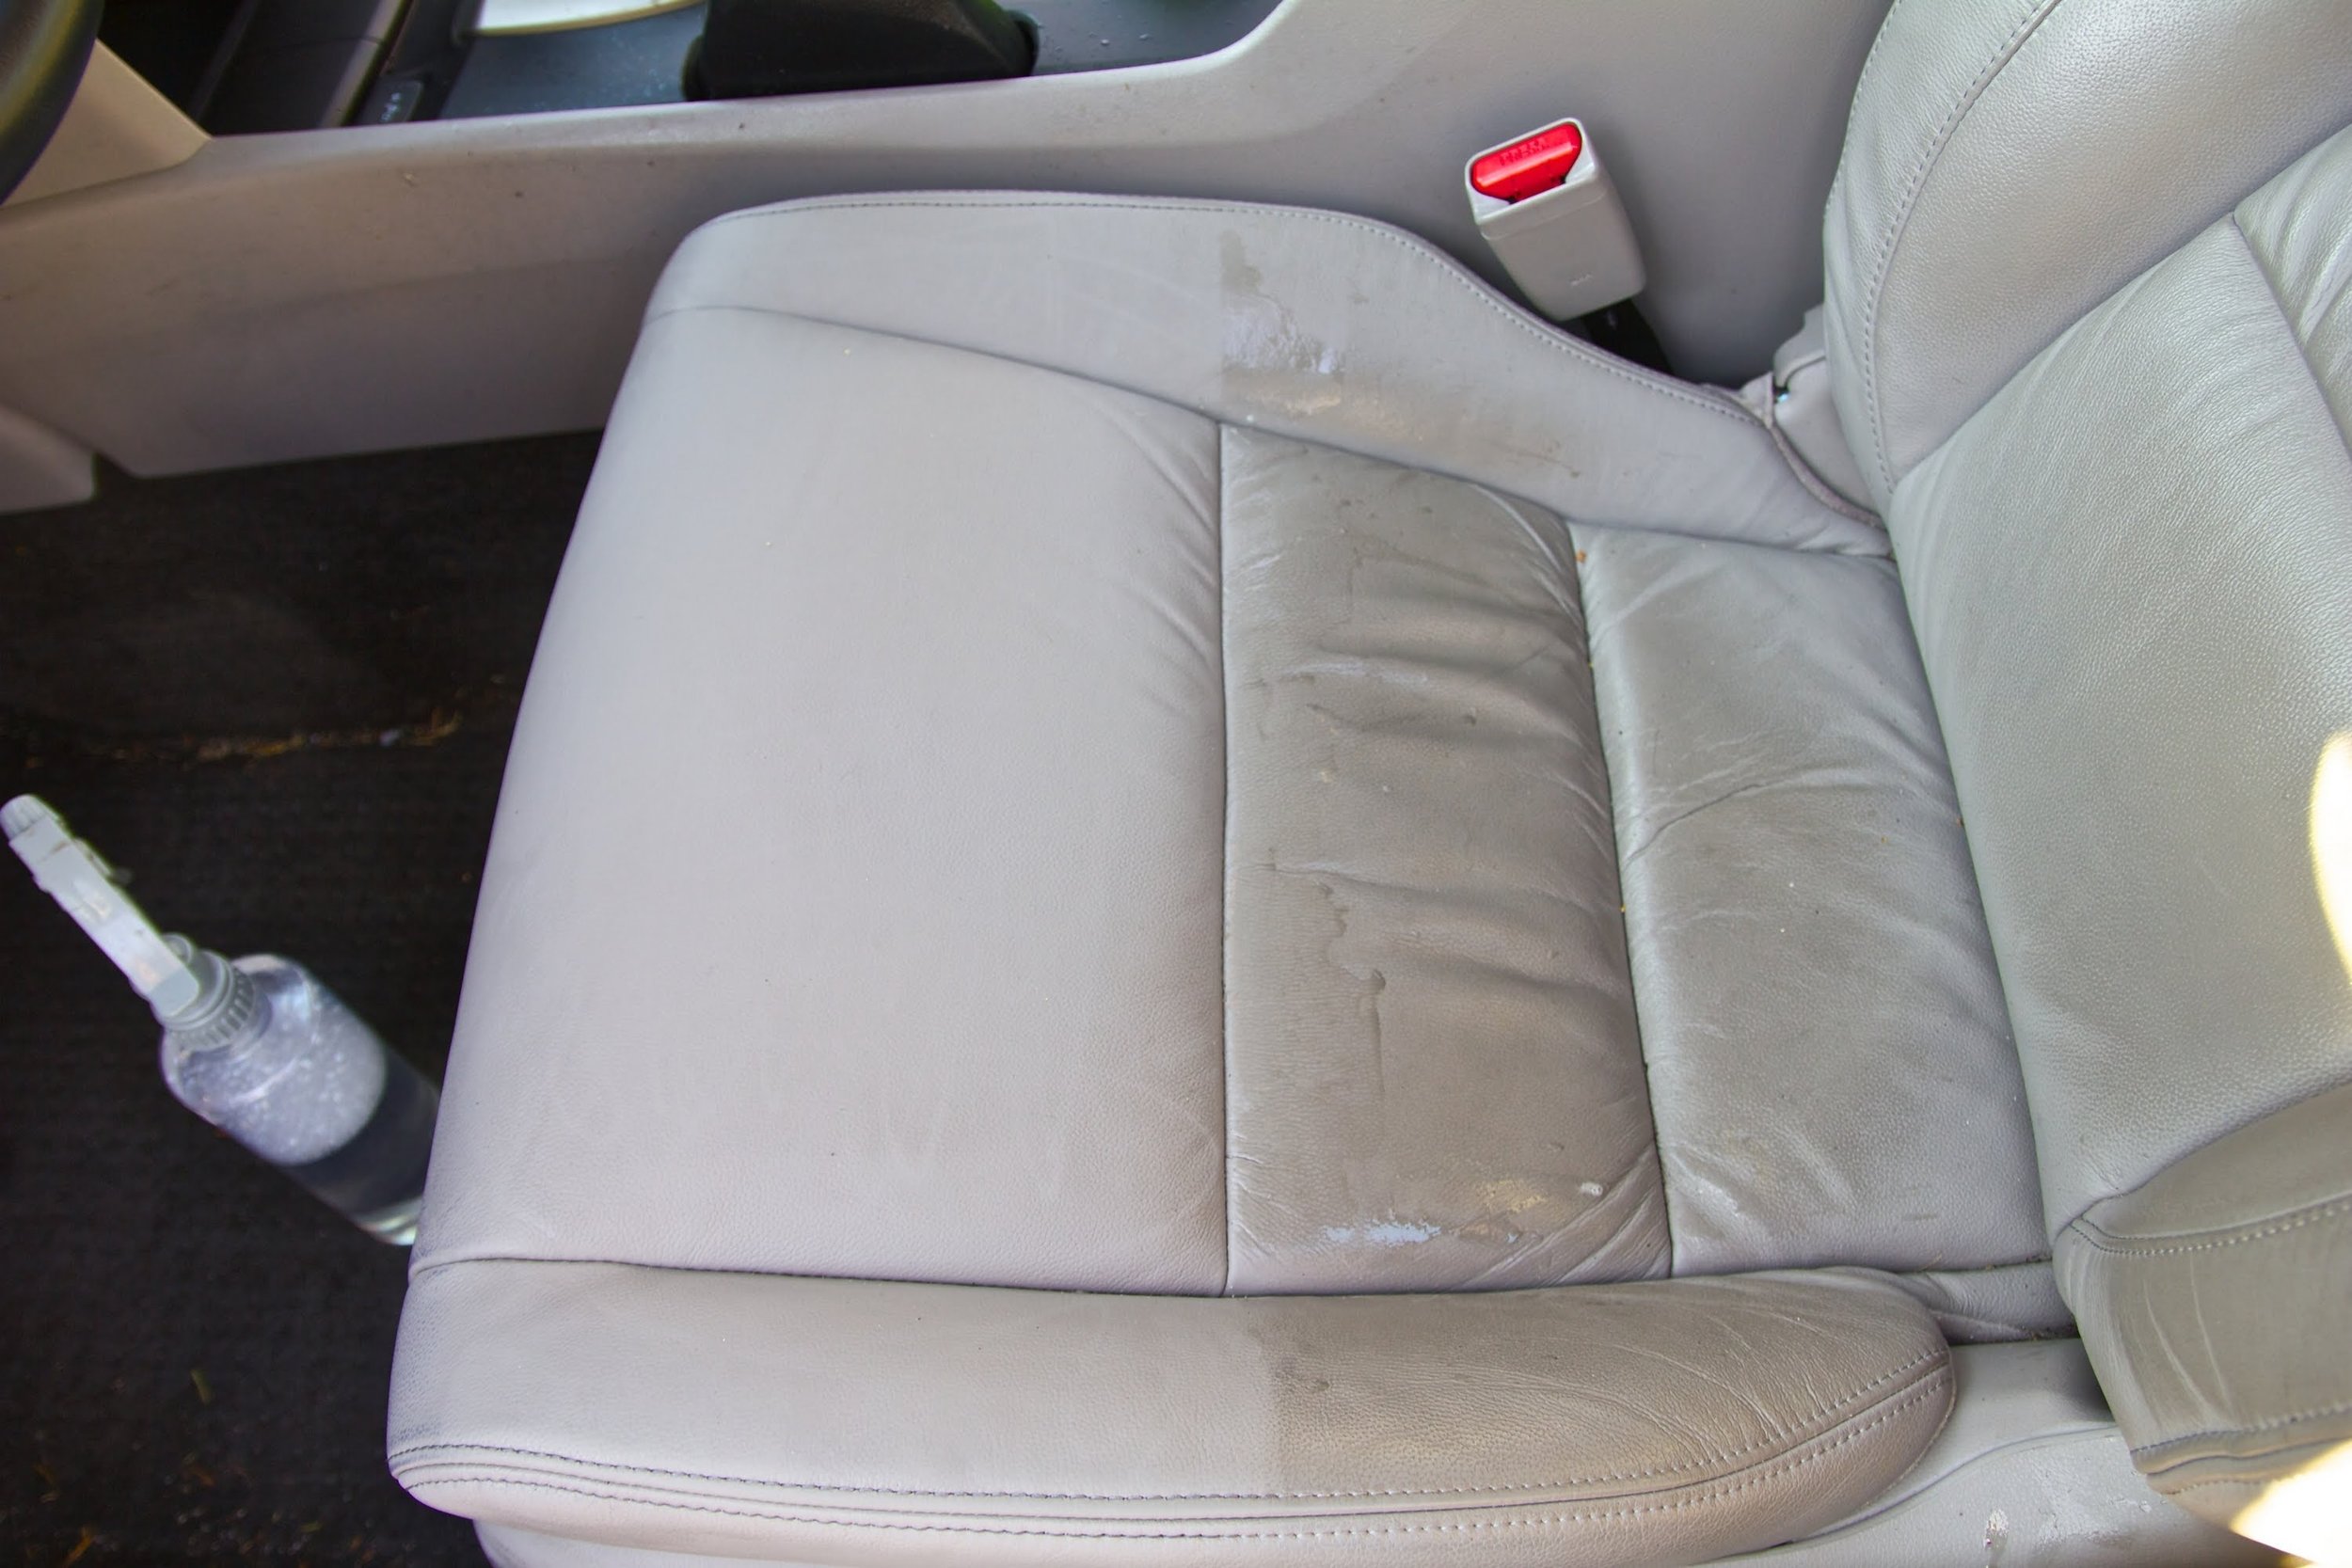 Mobile Car Detailing Winston M Nc How To Clean Condition Leather Seats Guide - How Do You Remove Paint From Leather Car Seats